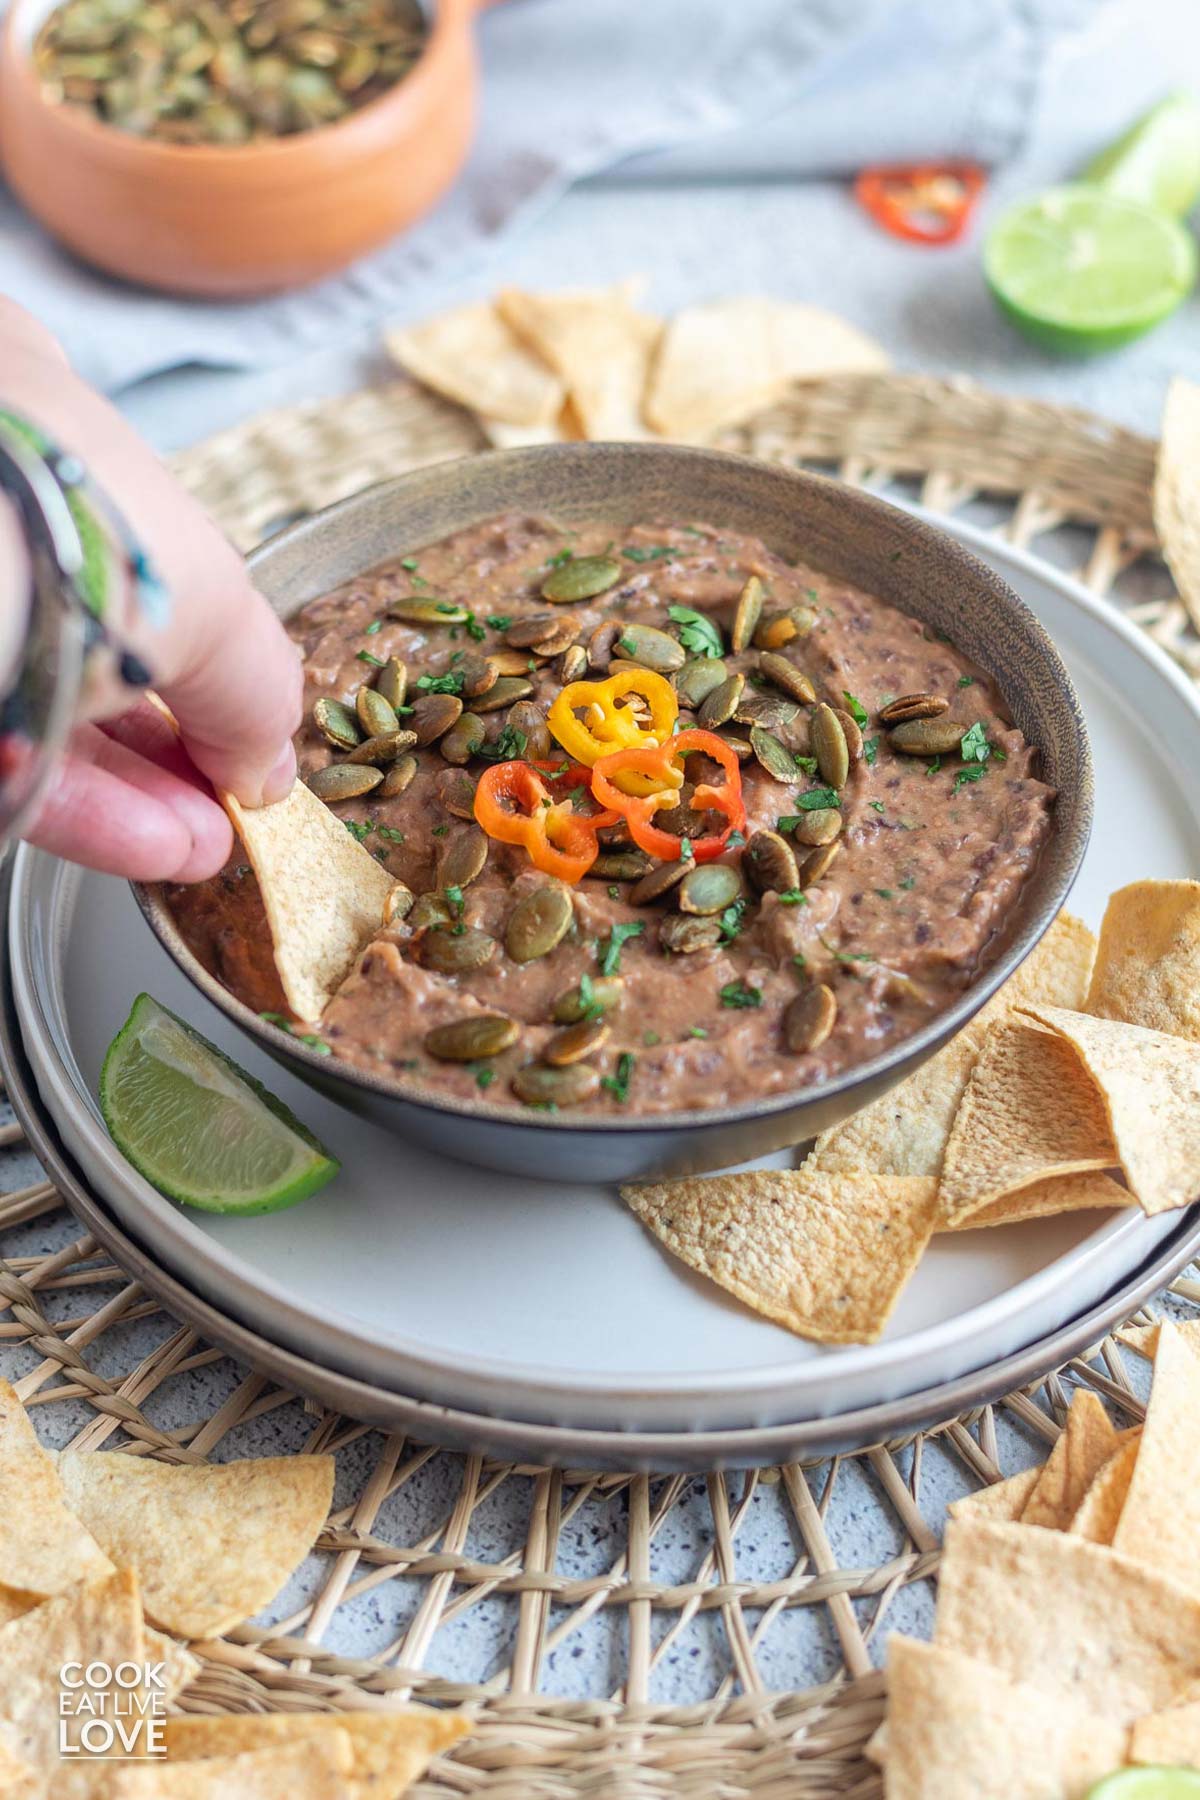 A hand reaching in with a chip to scoop up a bite of black bean dip vegan.